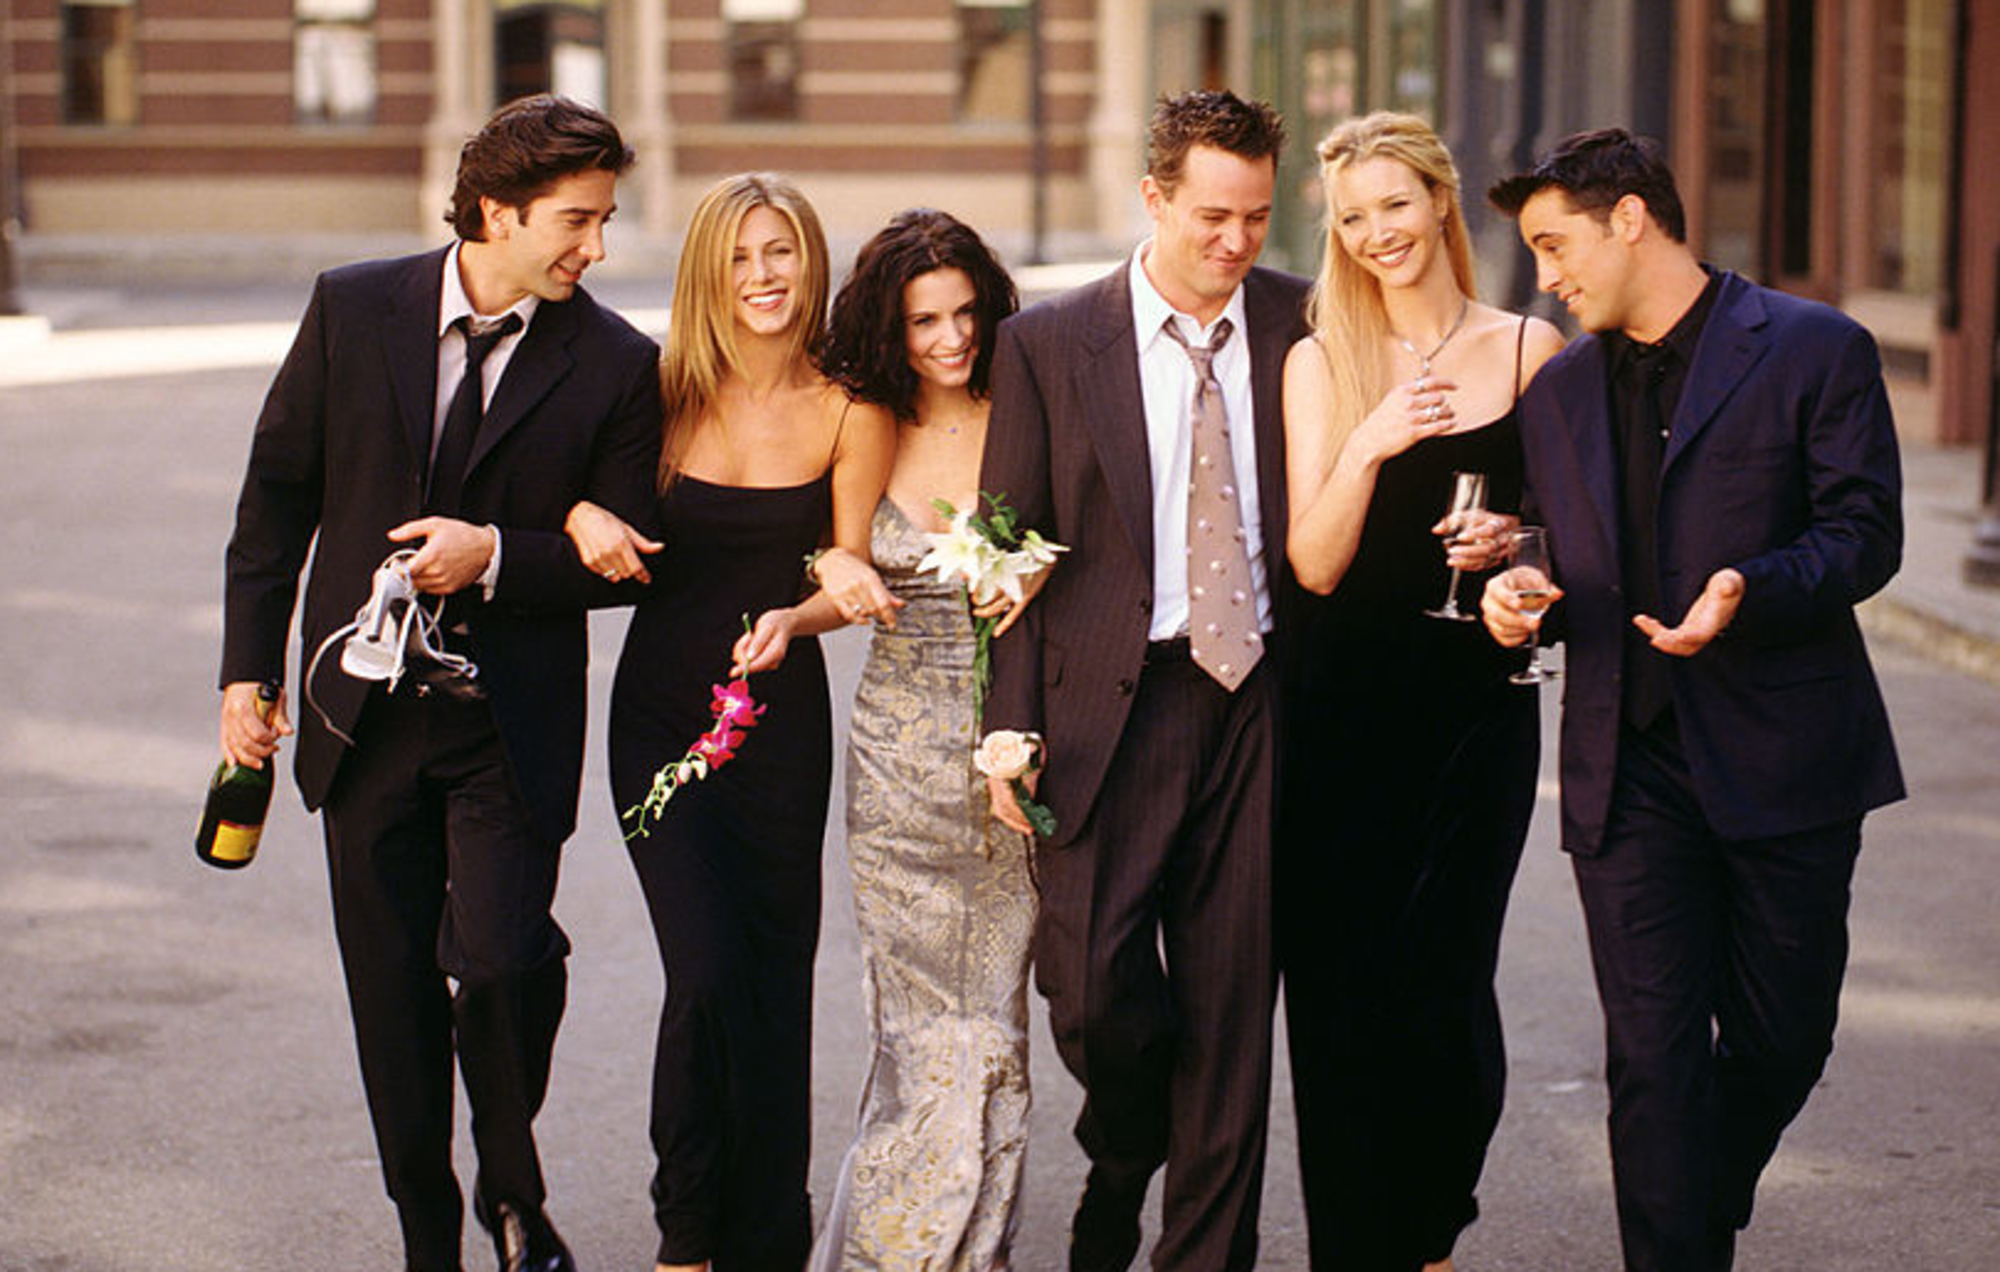 ‘Friends’ cast “working on a joint statement” about late co-star Matthew Perry